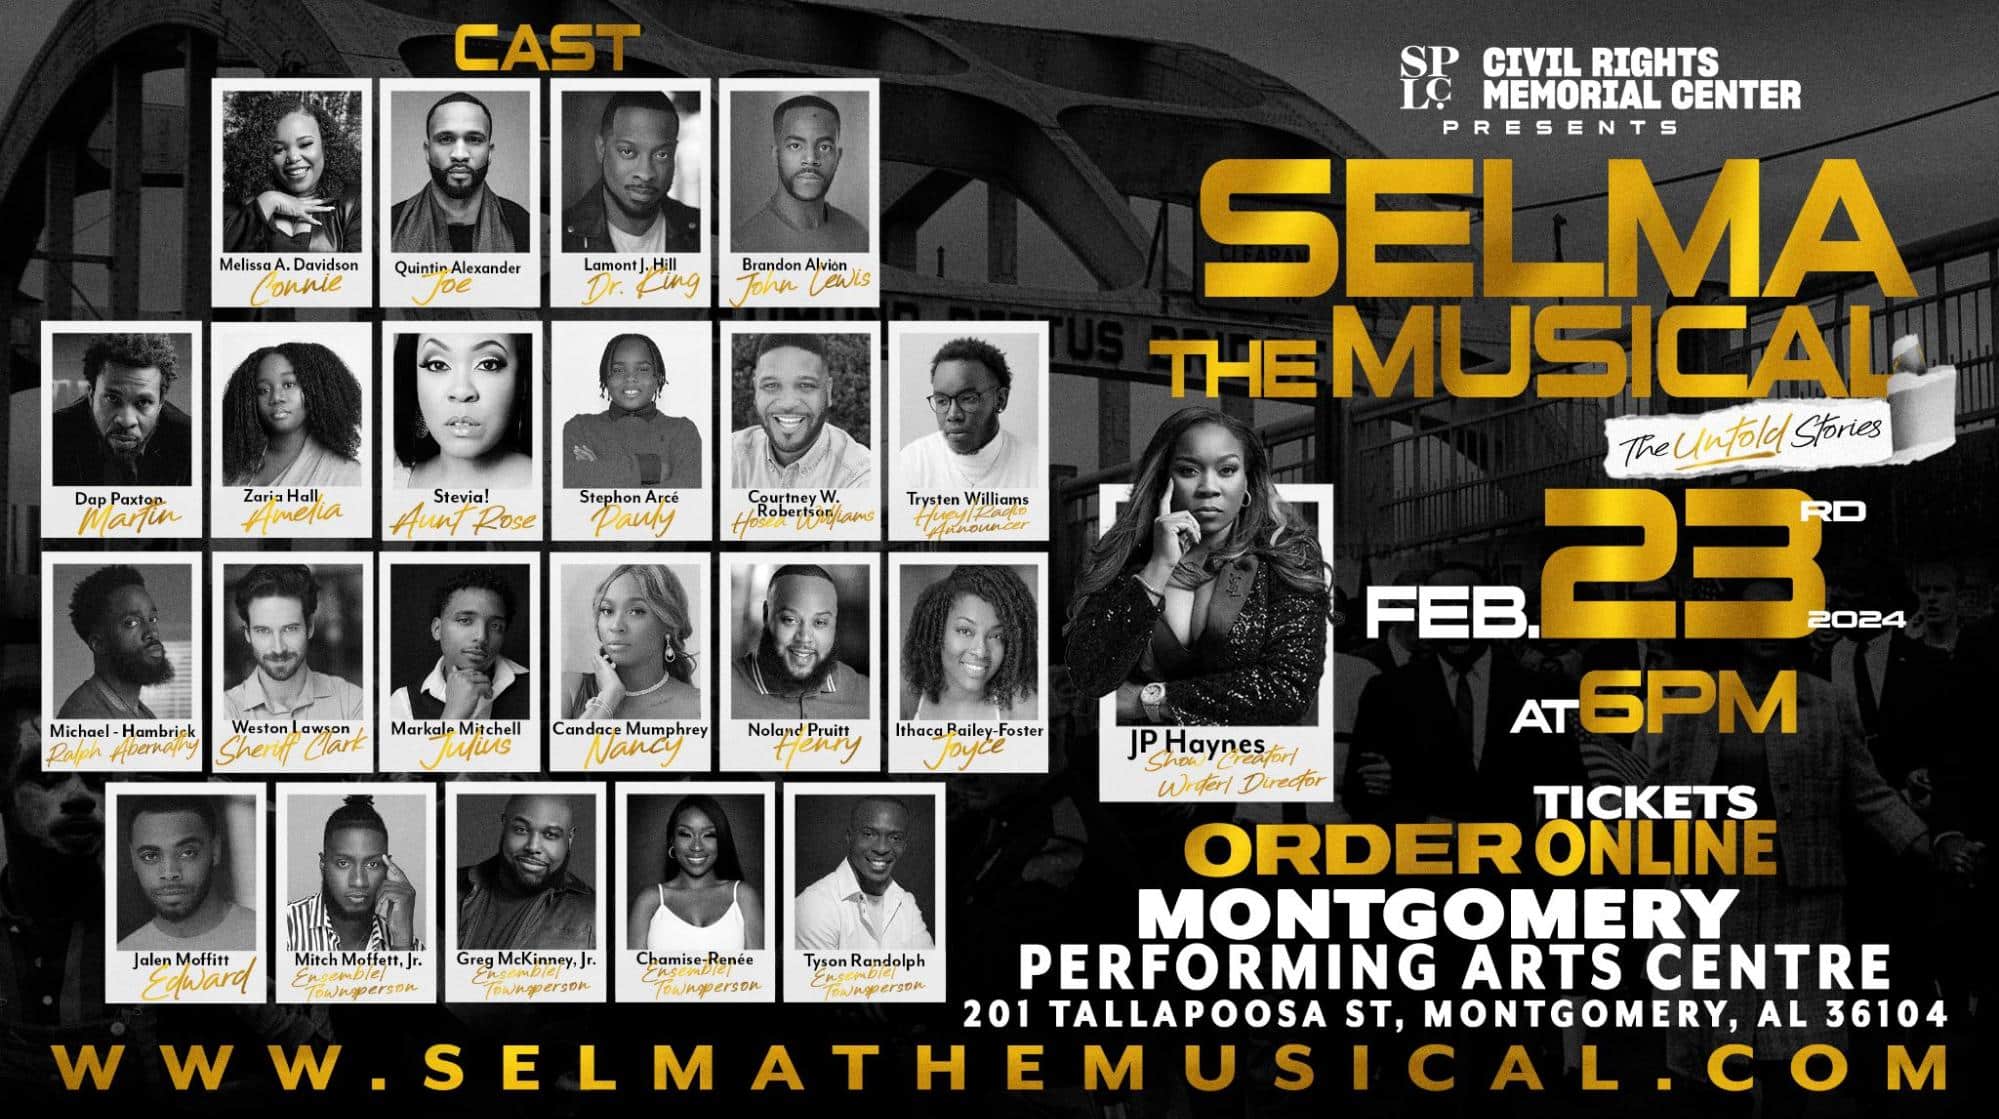 Selma the Musical: A One-Night Only Event Celebrating Black Excellence and History